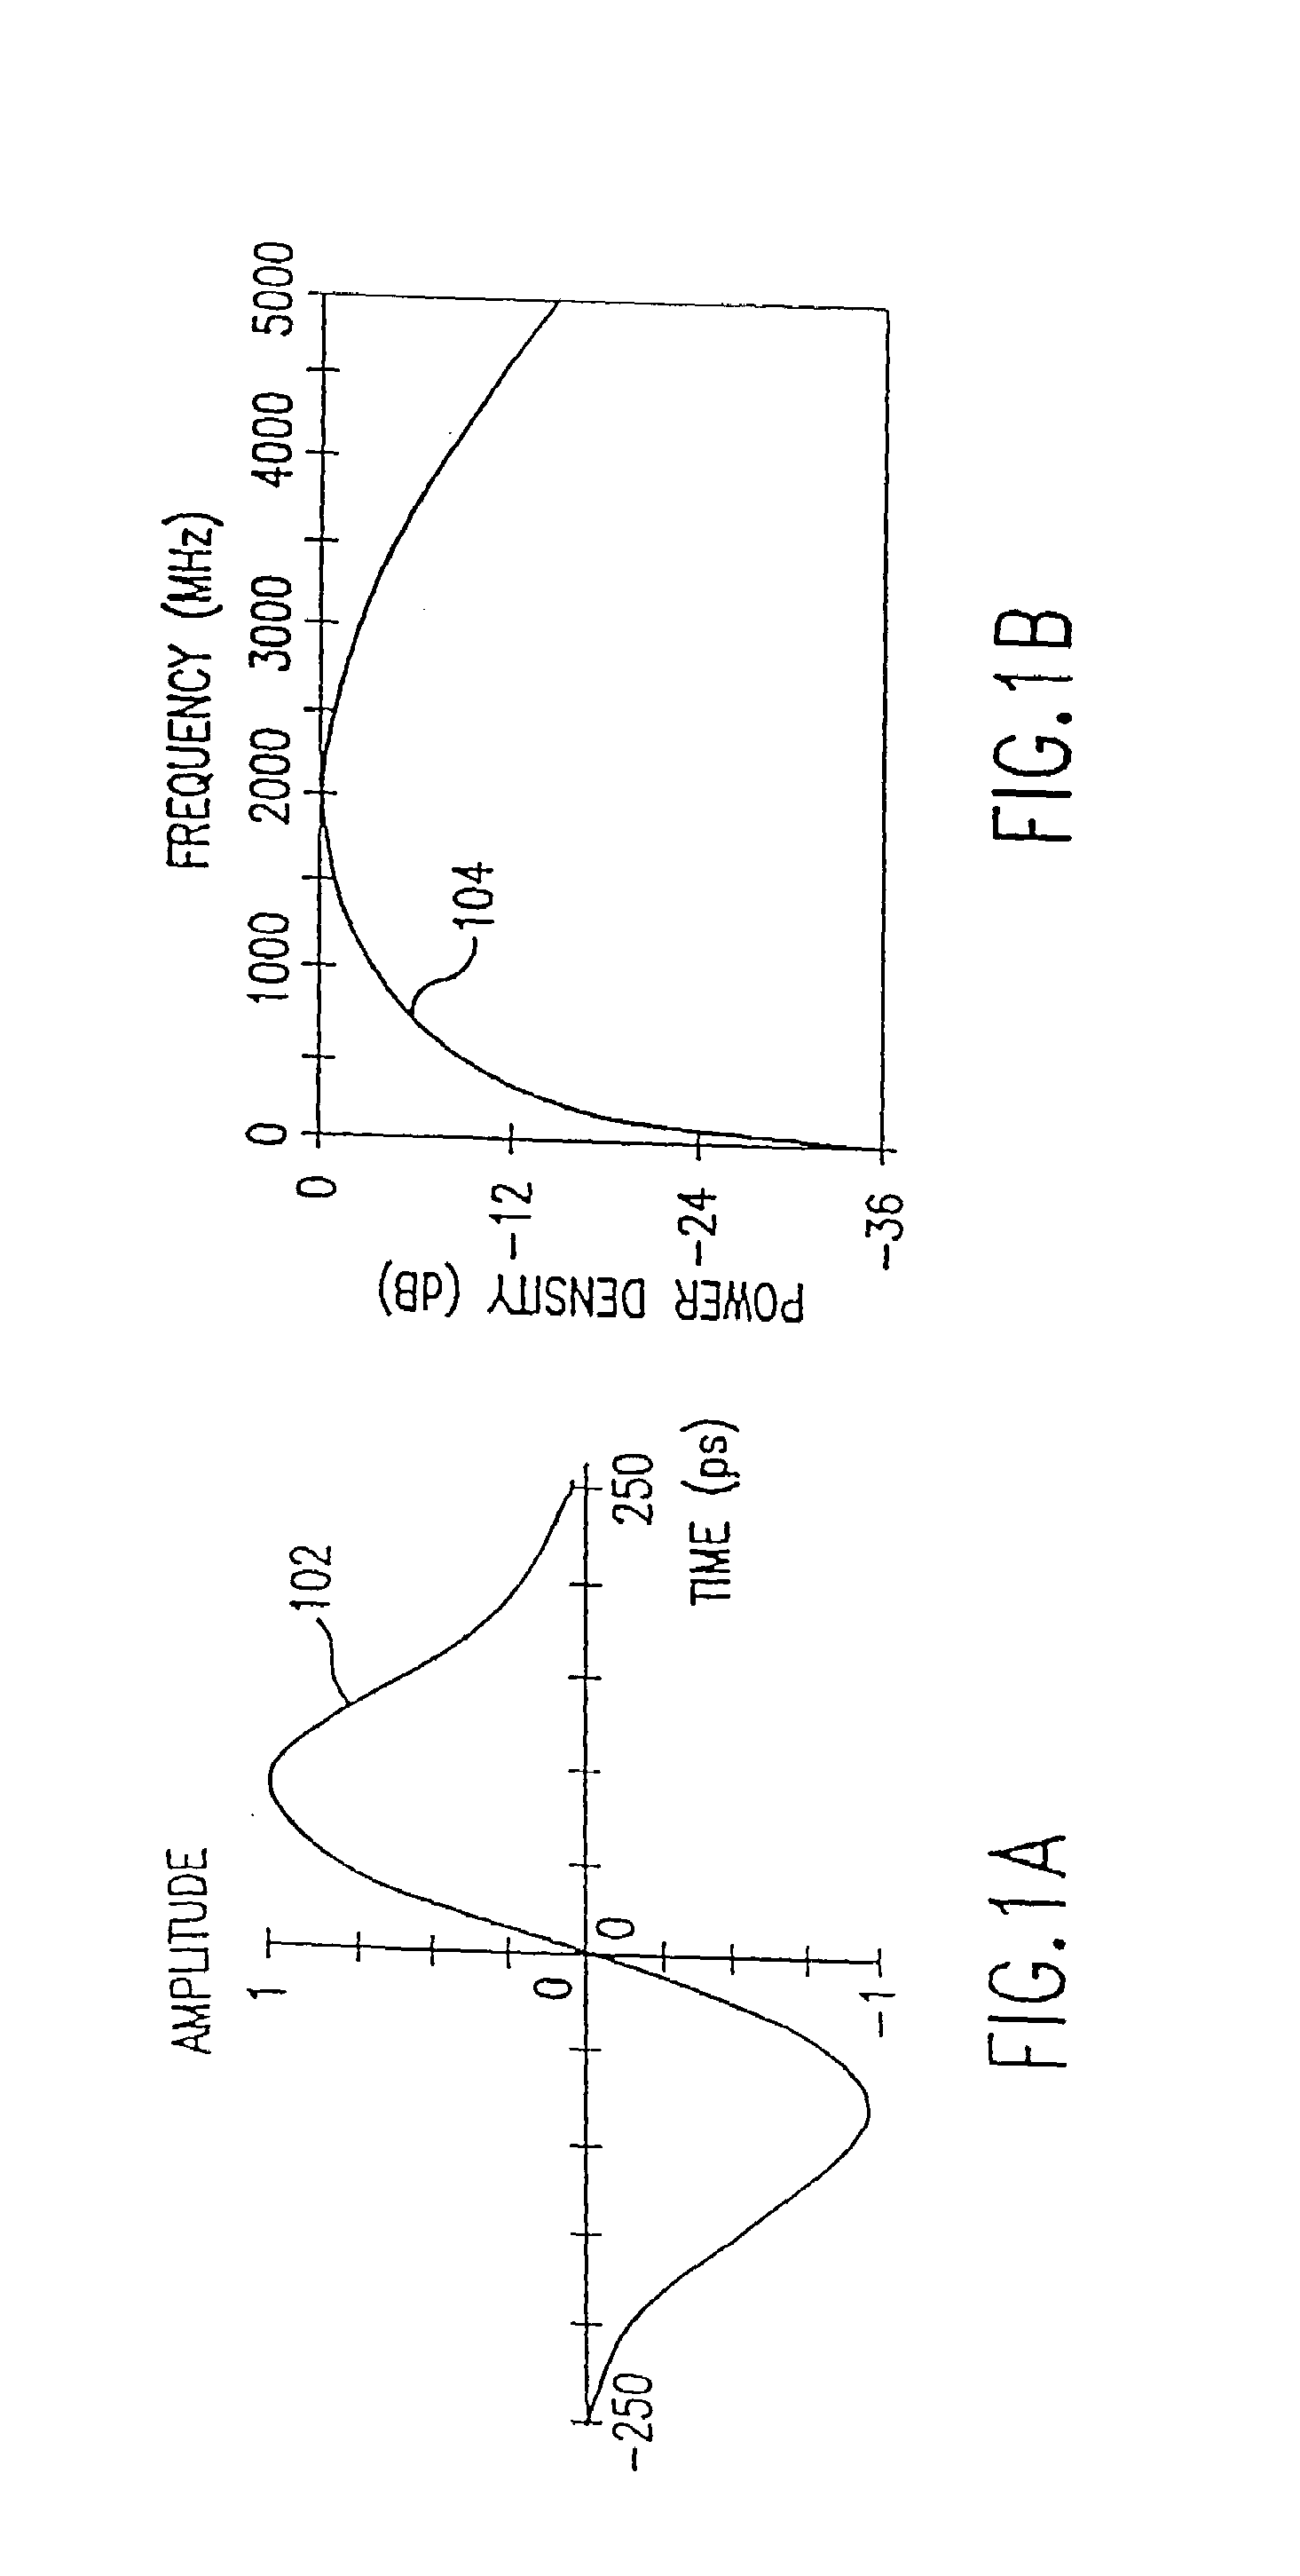 System and method for estimating separation distance between impulse radios using impulse signal amplitude